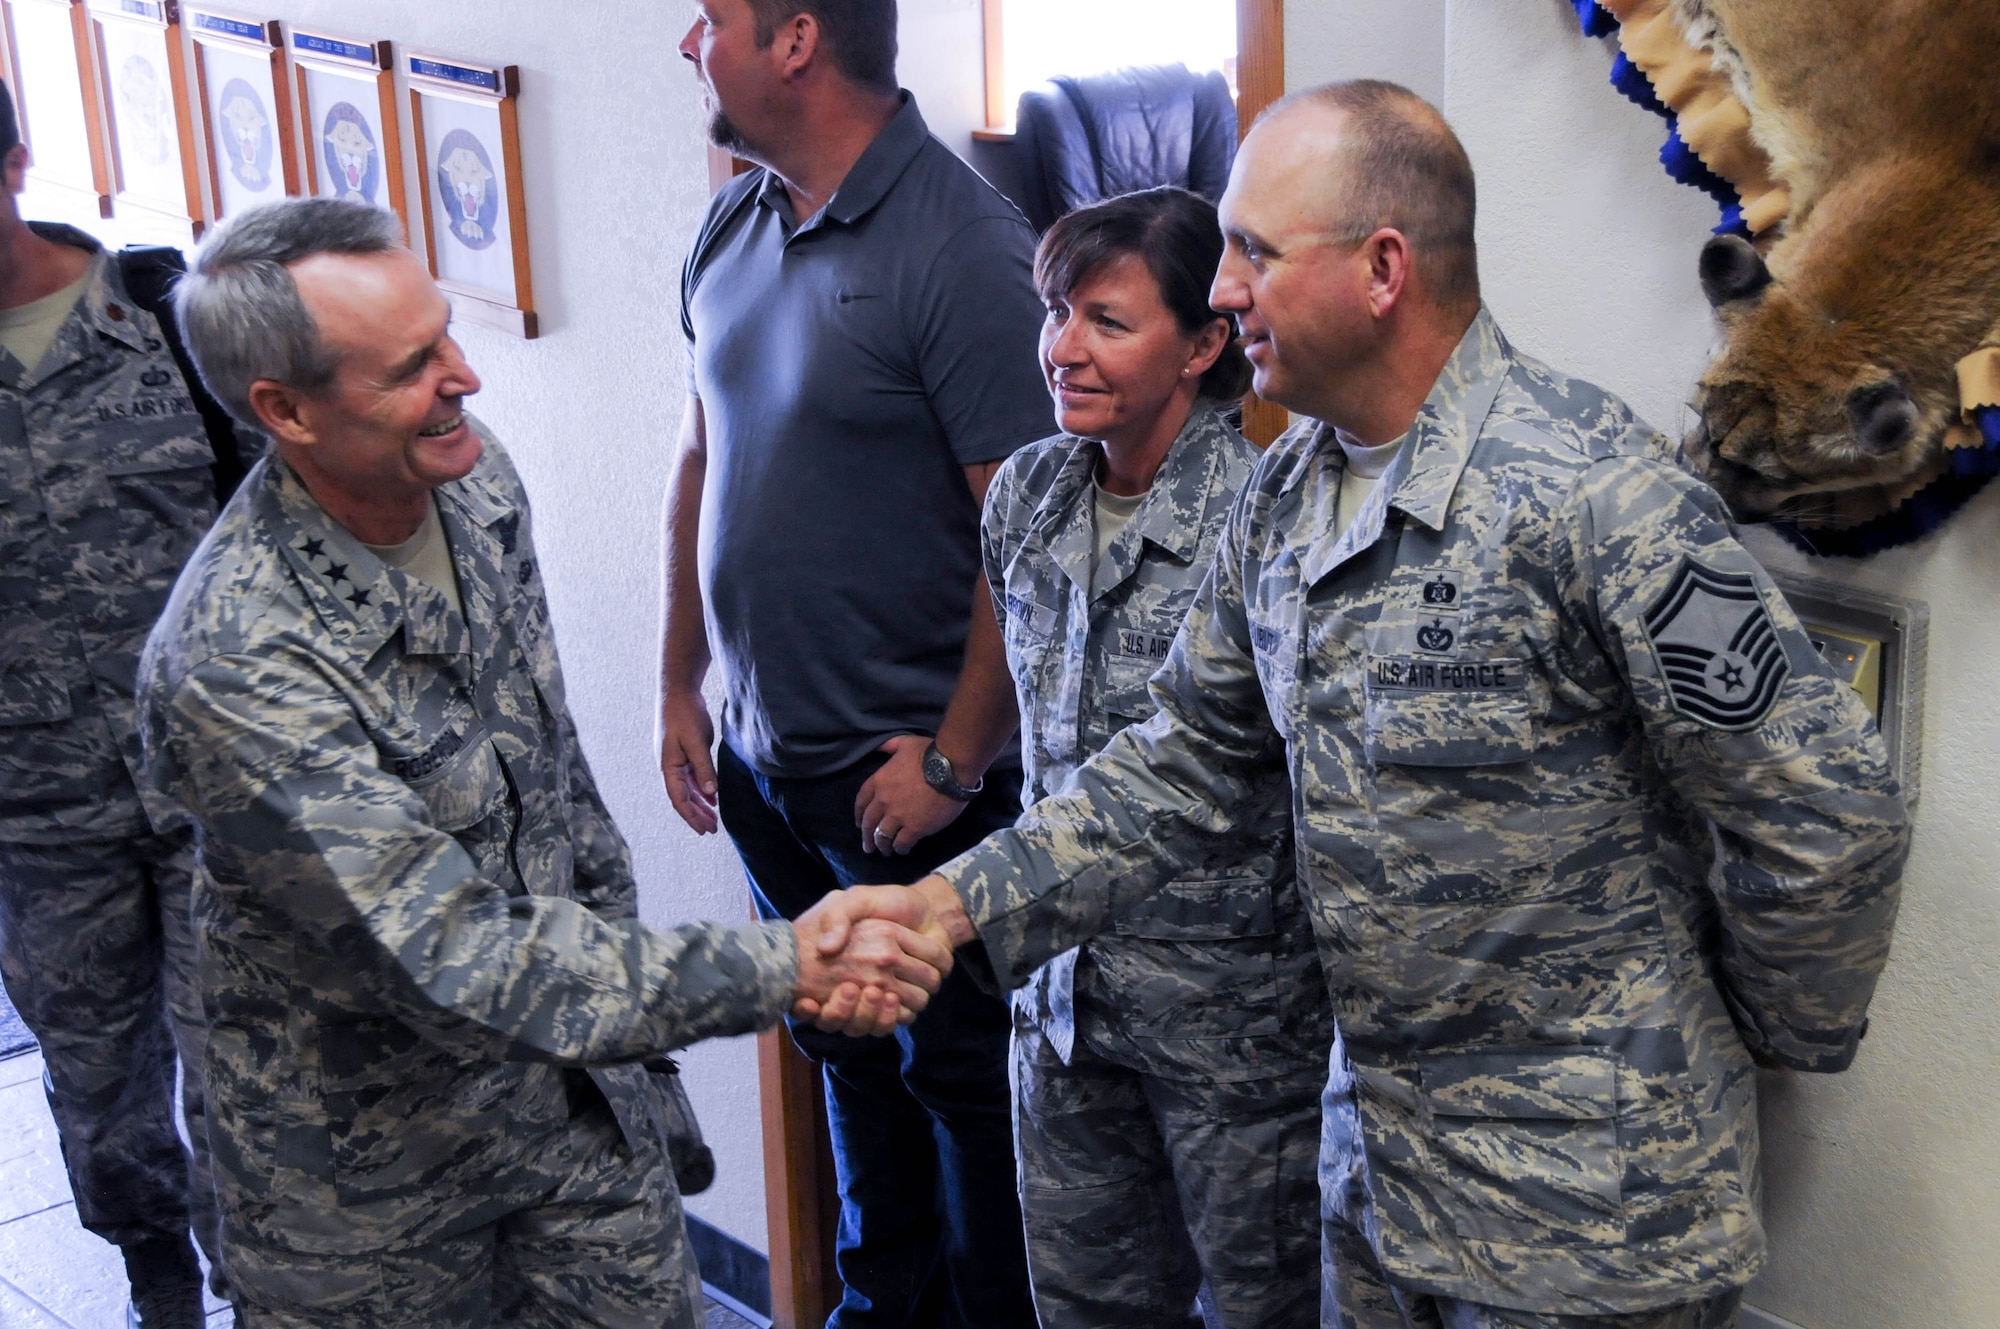 U.S. Air Force Lt. Gen. Darryl Roberson, commander of Air Education and Training Command, shakes hands with Senior Master Sgt. Kenneth Aubut, 173rd Civil Engineer Squadron, as he tours the squadron at Kingsley Field, Ore., July 7, 2016. Roberson had a firsthand look at the unit's mission and capabilities, which includes training F-15C Eagle fighter pilots. (U.S. Air National Guard photo by Staff Sgt. Penny Snoozy)